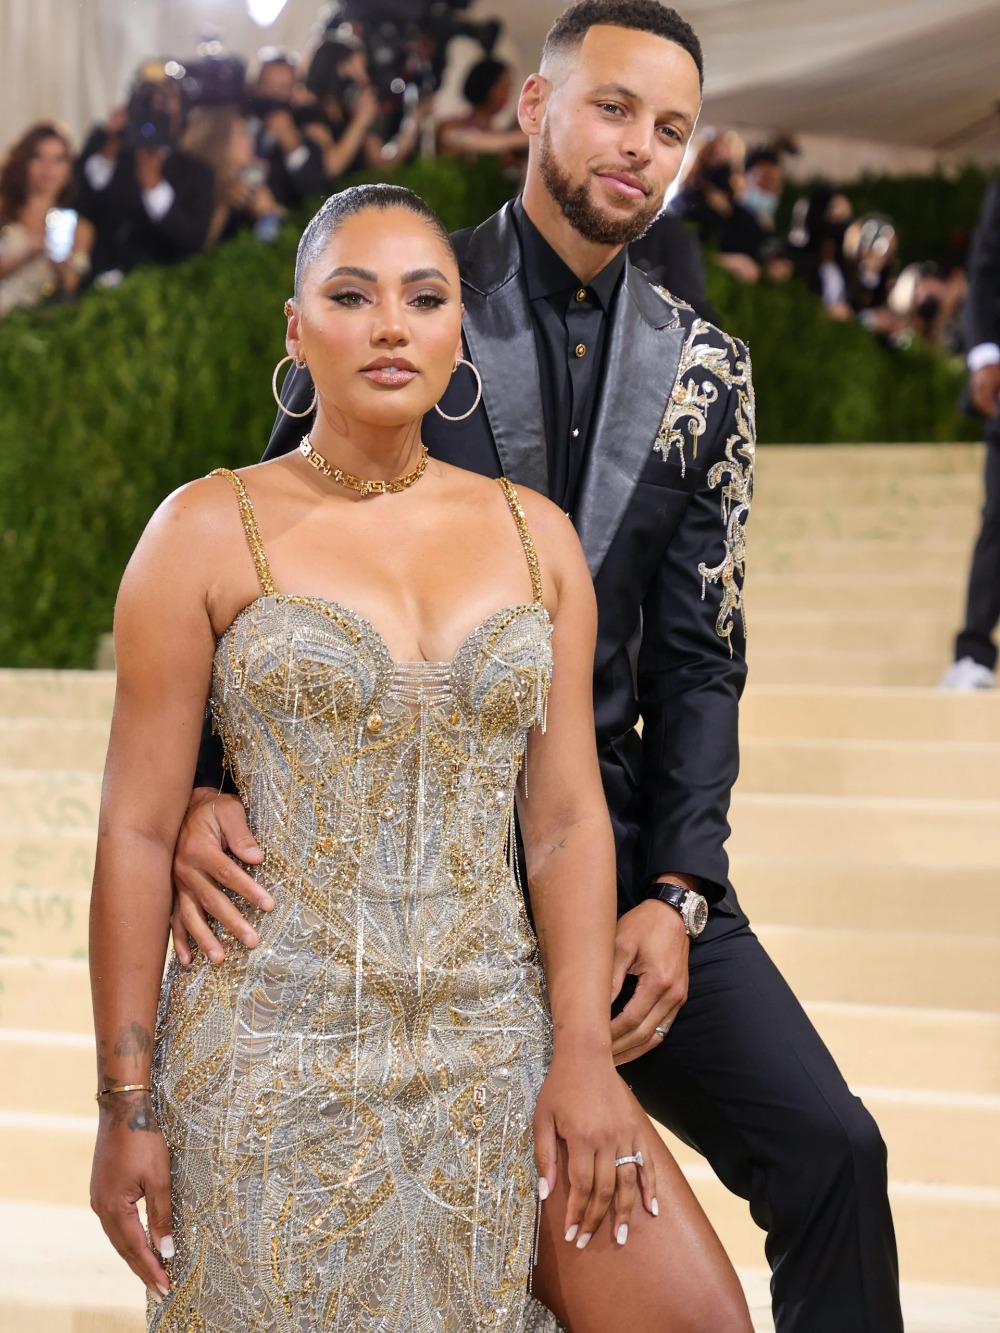 likhoa stephen curry surprised everyone when he organized a memorable th wedding anniversary for his wife ayesha curry 6548fc7196a86 Stephen Curry Surprised Everyone When He Organized A Memorable 10th Wedding Anniversary For His Wife Ayesha Curry.